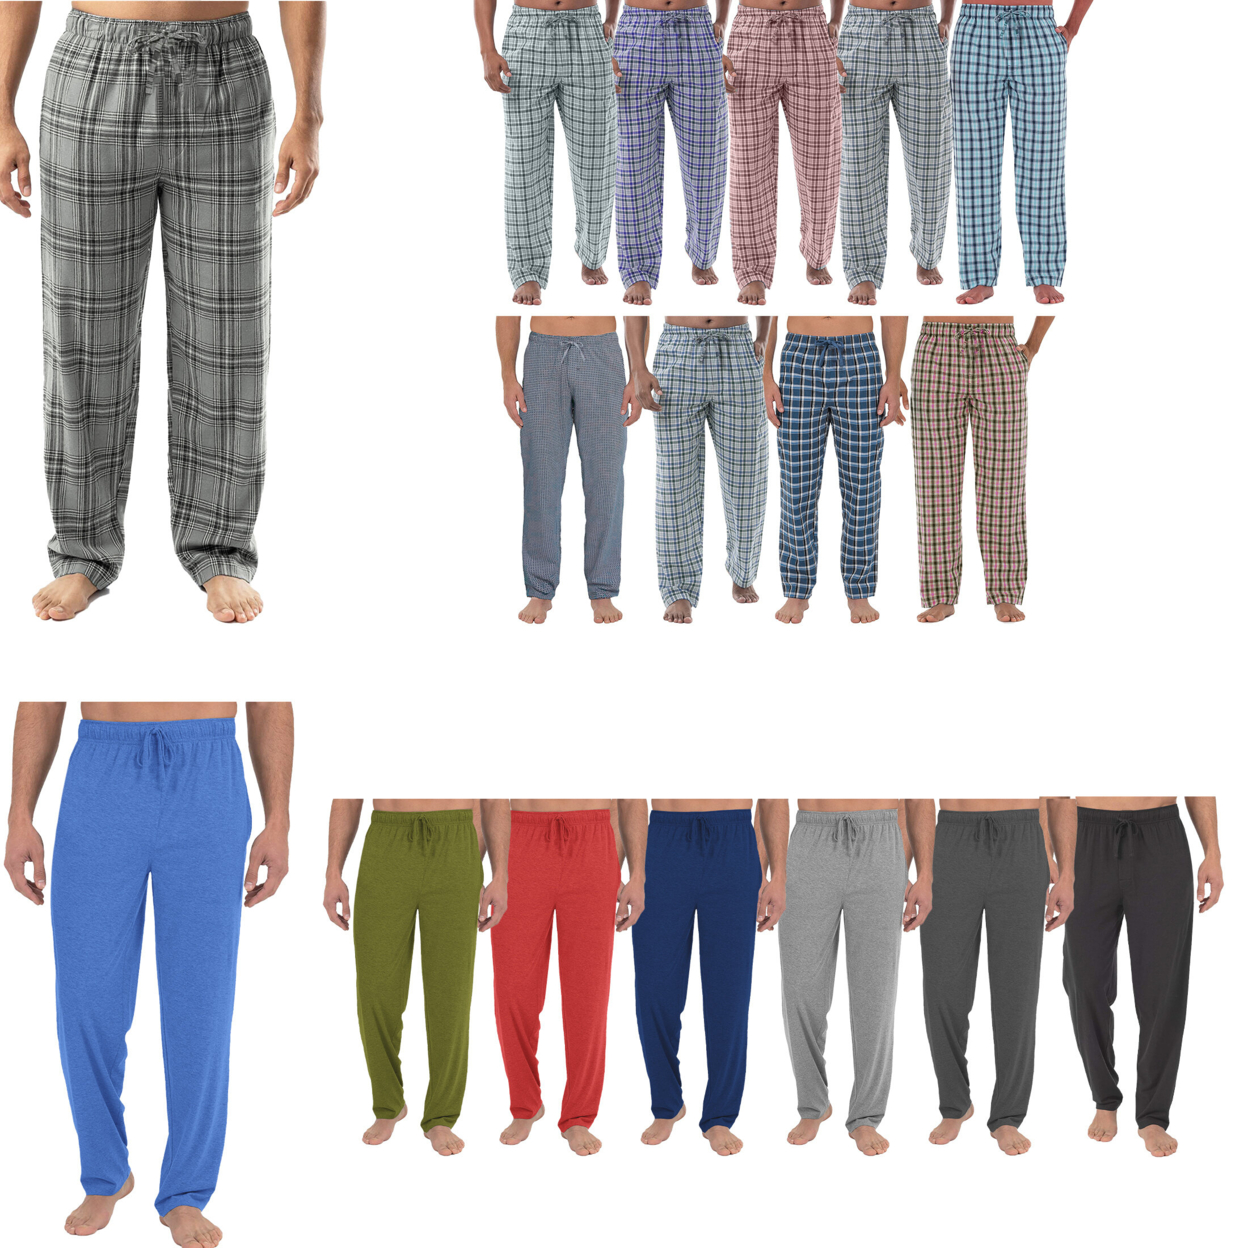 3-Pack: Men's Soft Jersey Knit Long Lounge Sleep Pants With Pockets - Solid & Plaid, Small